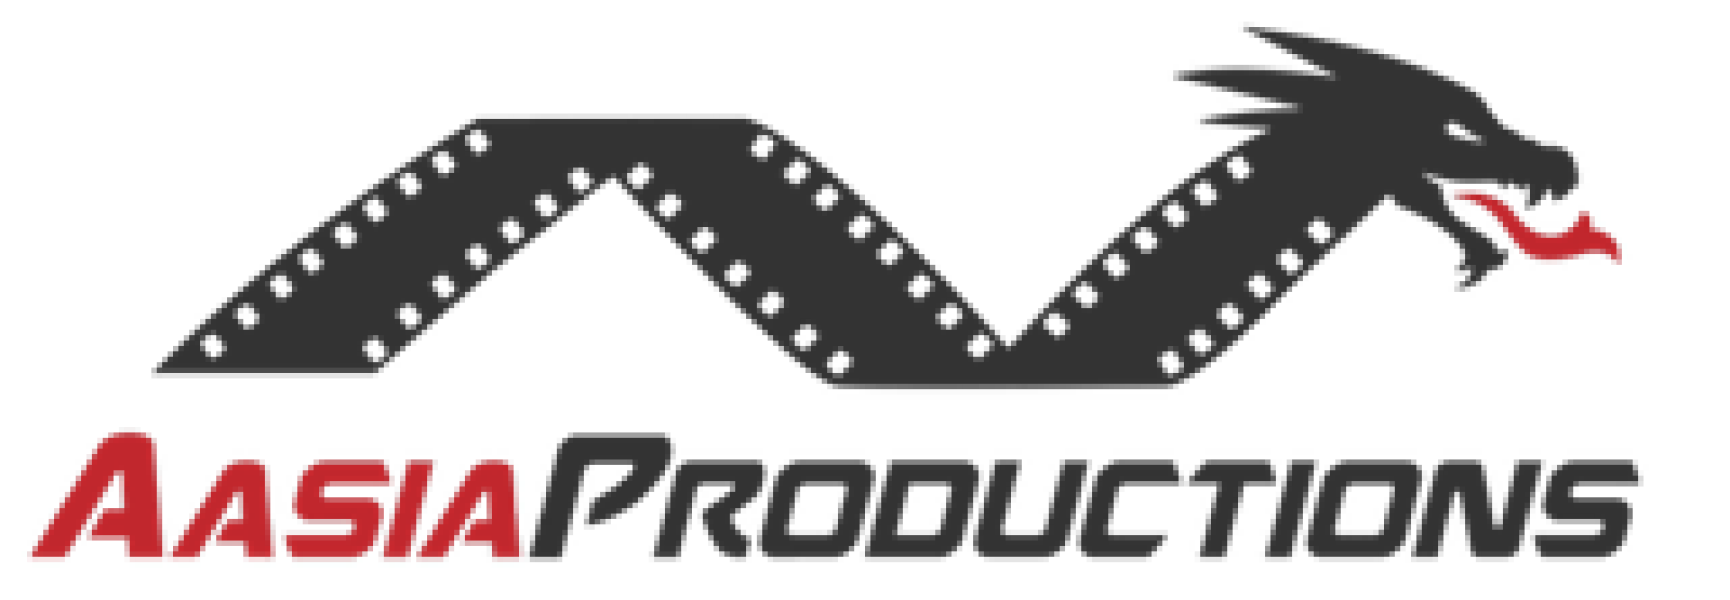 /assets/production_companies/aasia_productions/aasianew_sourcefile.png